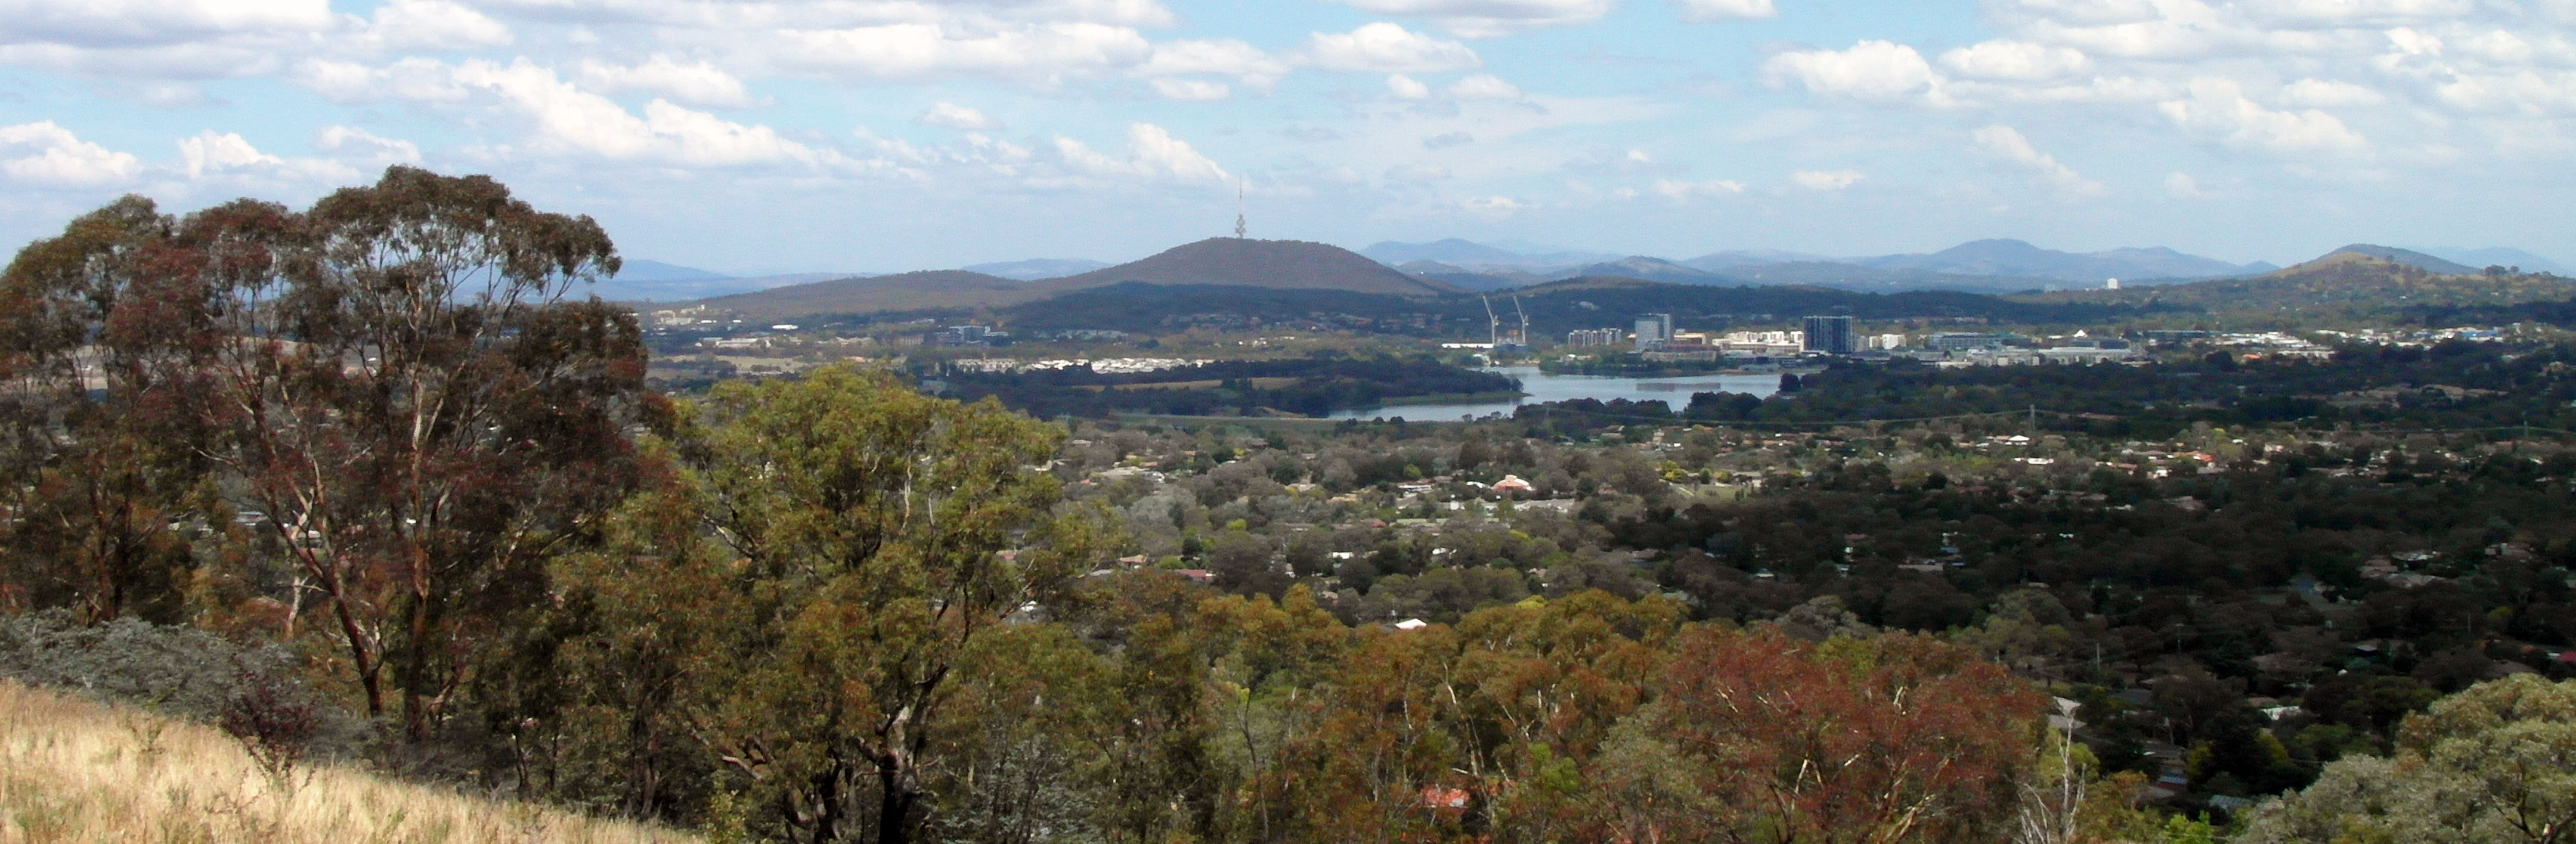 Looking towards Black Mountain in Canberra